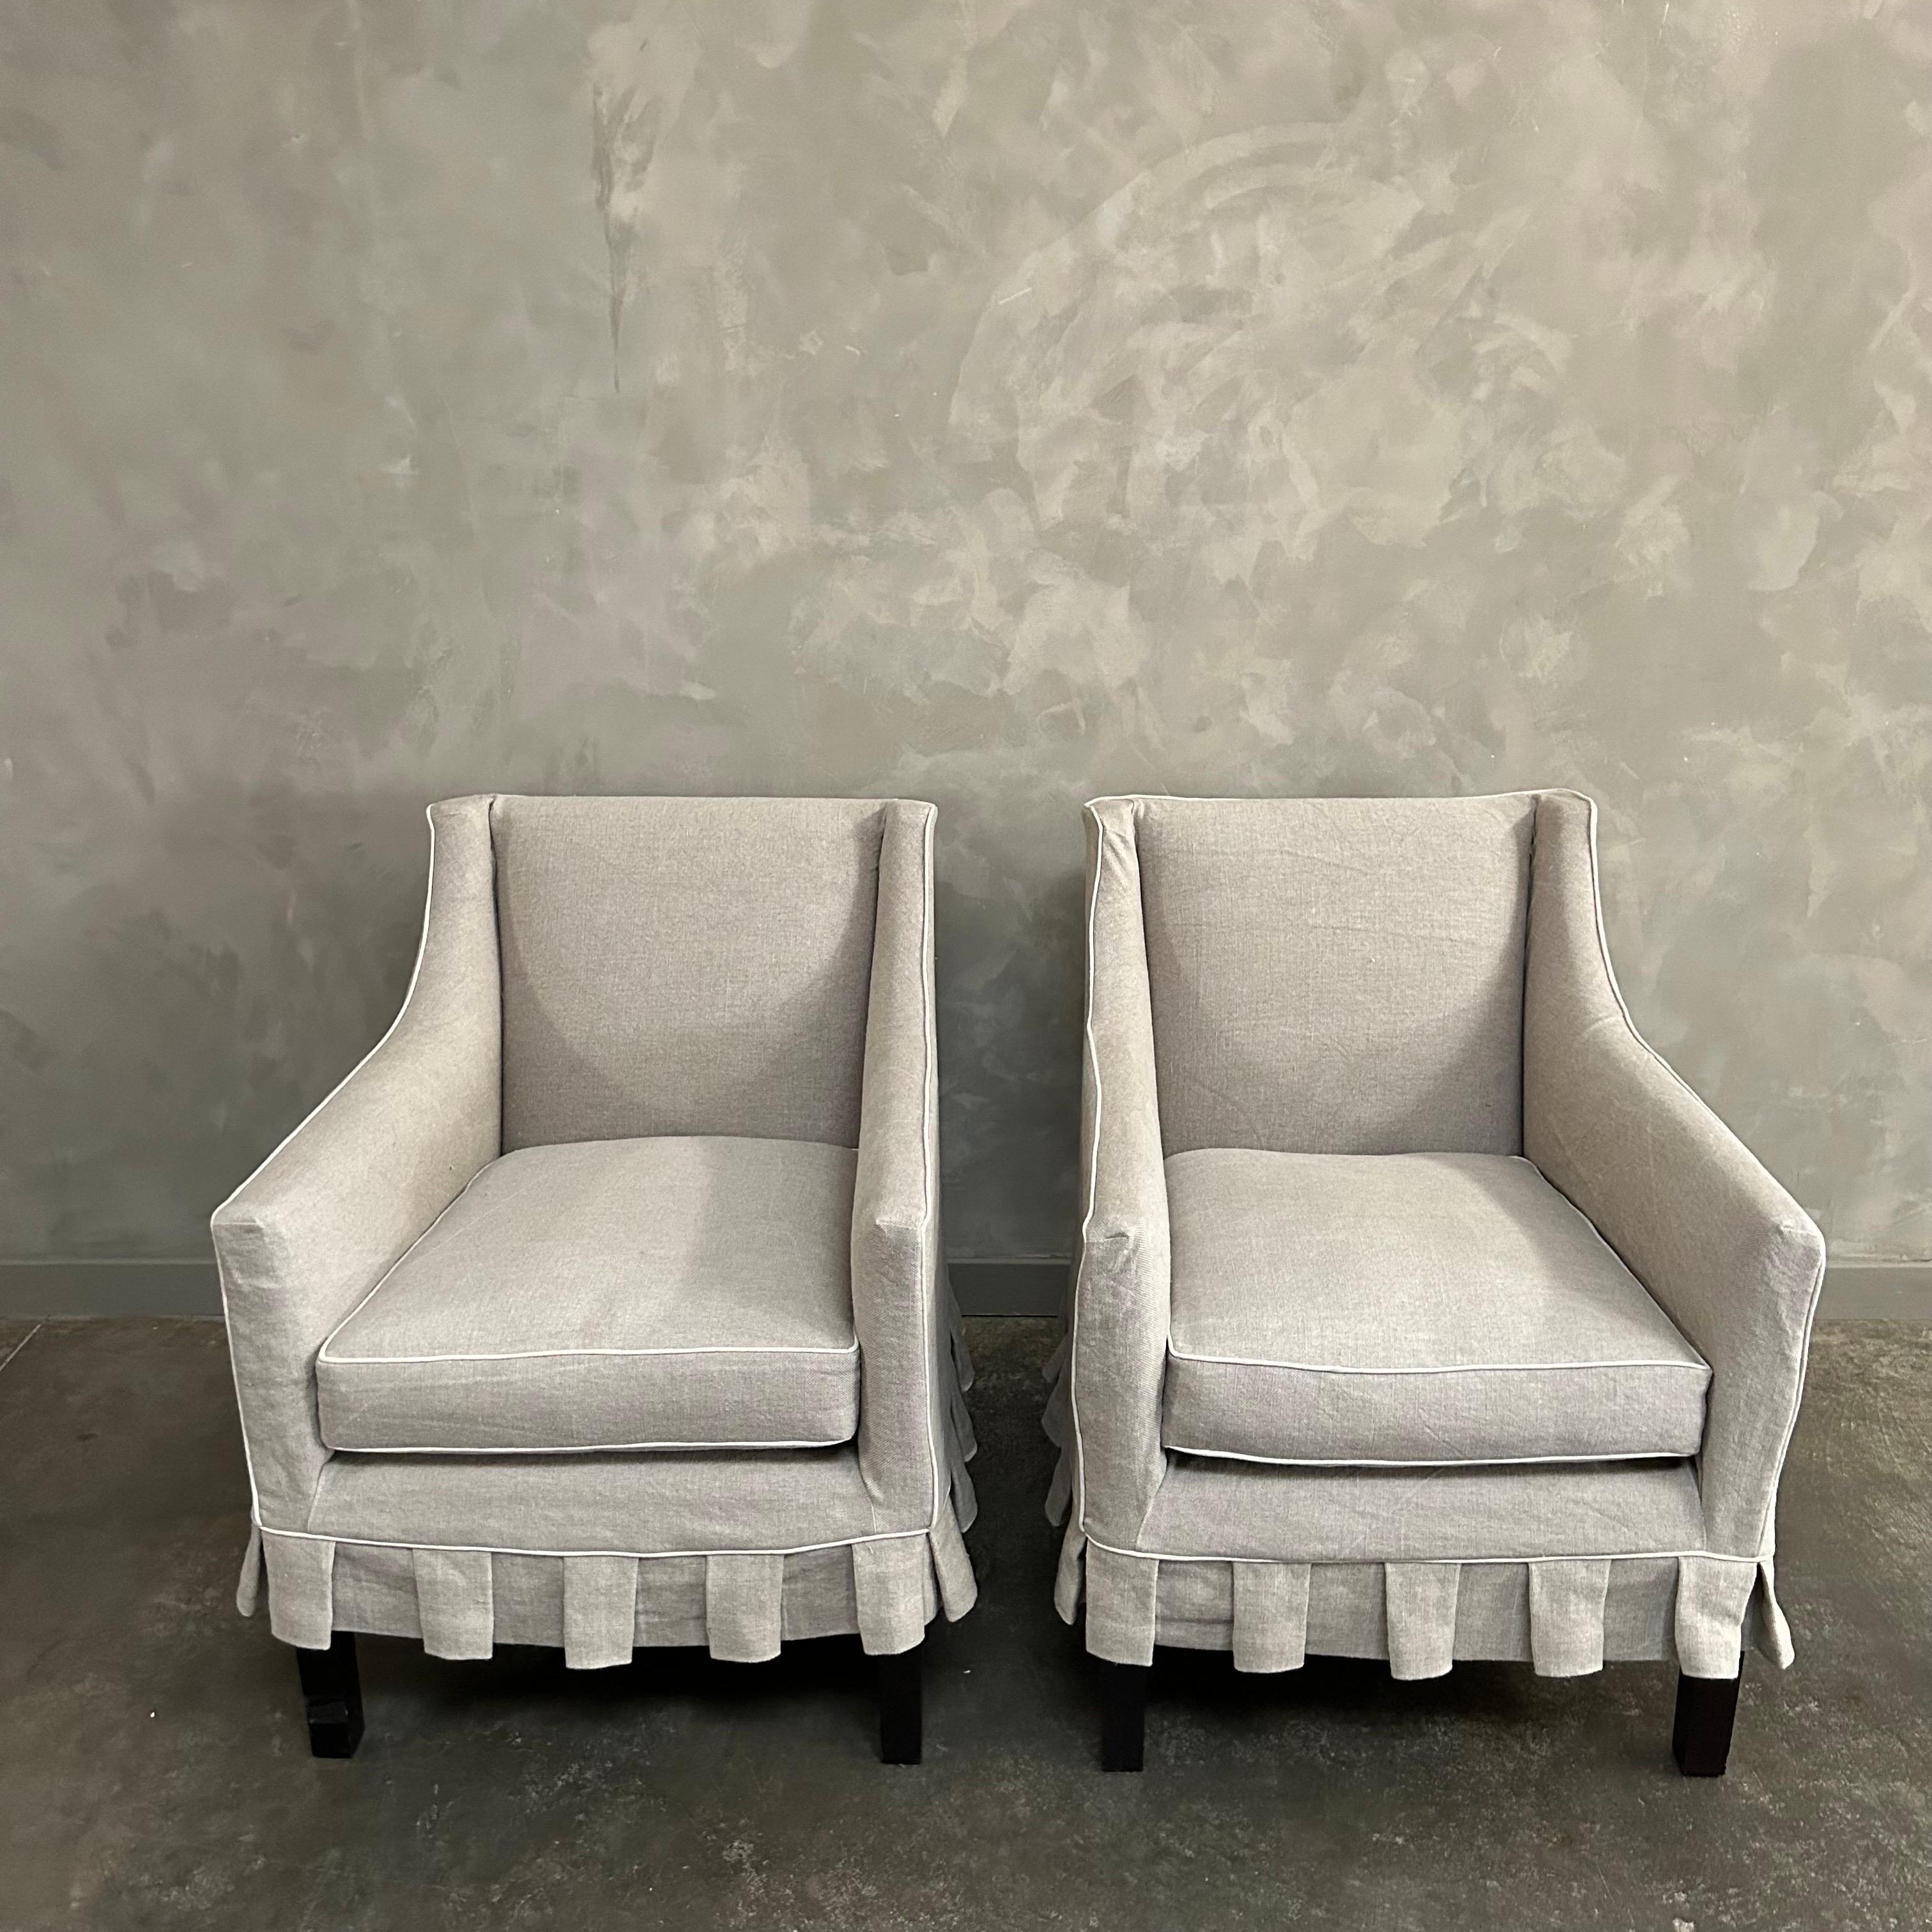 Pair of vintage chairs c1960s New York custom made.
A gold cotton upholstery is slip covered in a beautiful heavy weight nubby natural Irish linen, with pleated ruffle skirt and contrasting welt.
The seats are a high quality down feather wrapped